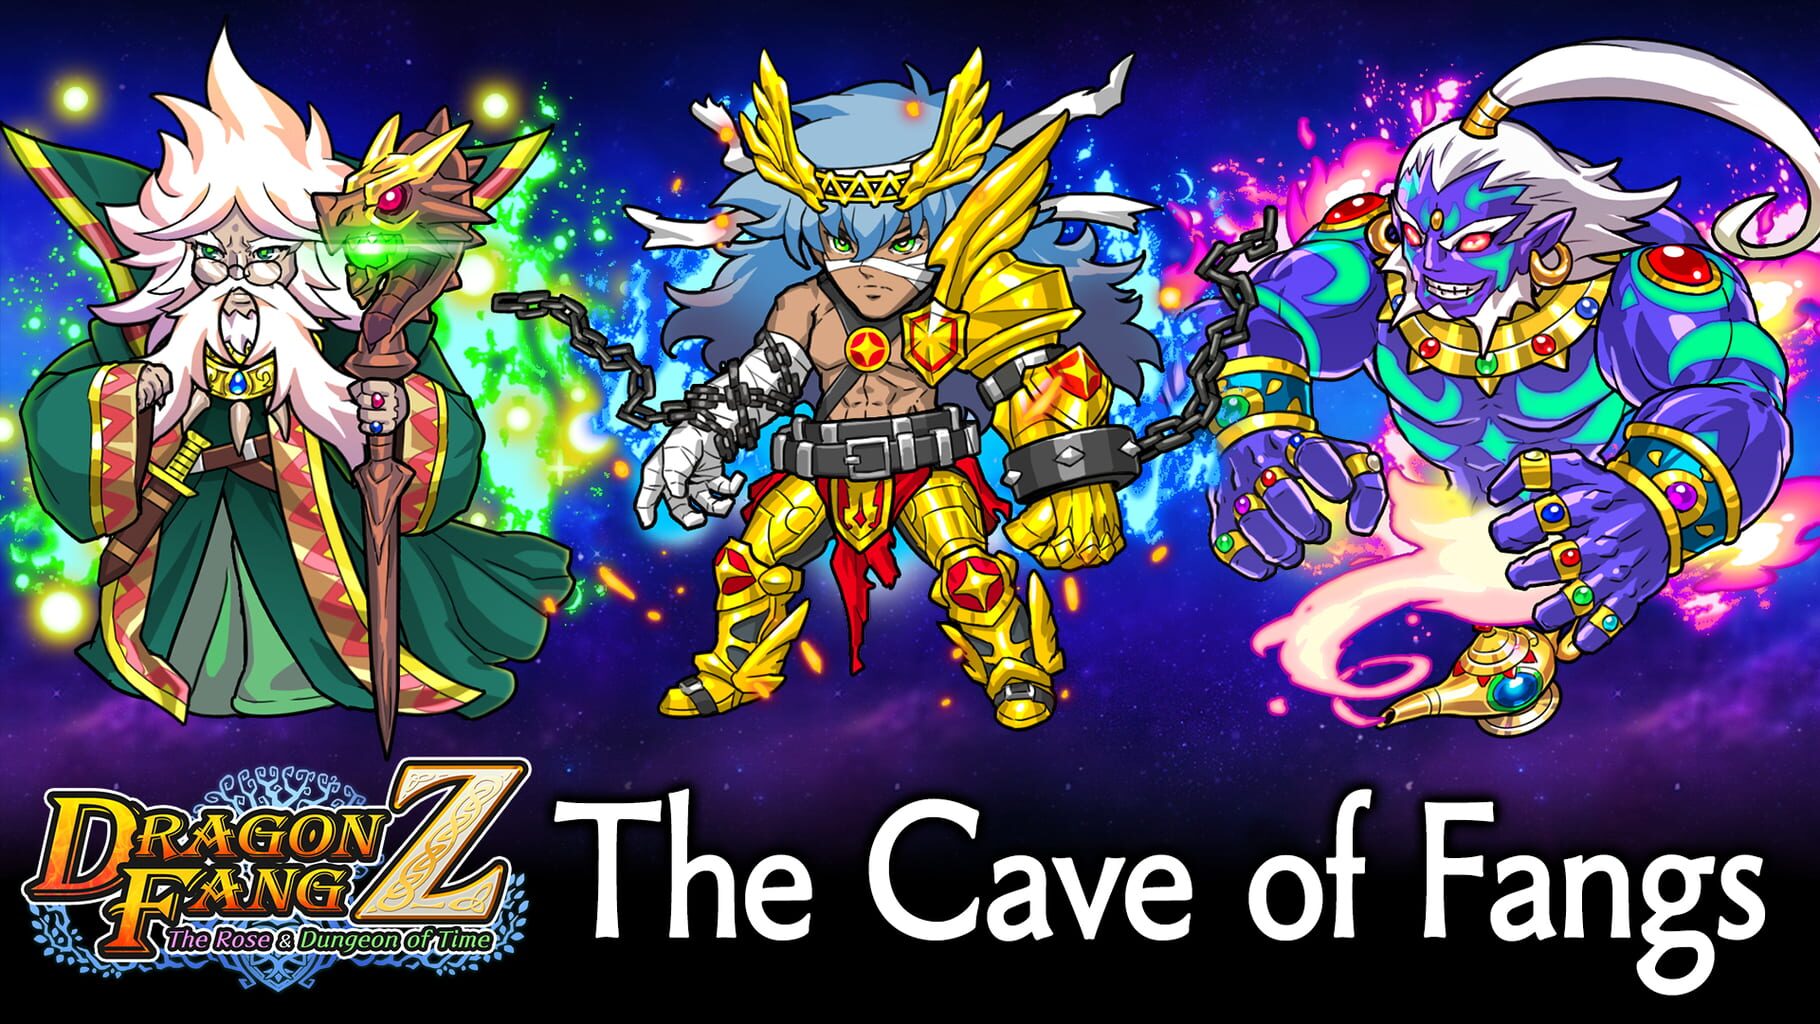 Dragon Fang Z: The Rose & Dungeon of Time - Extra Dungeon: The Cave of Fangs artwork